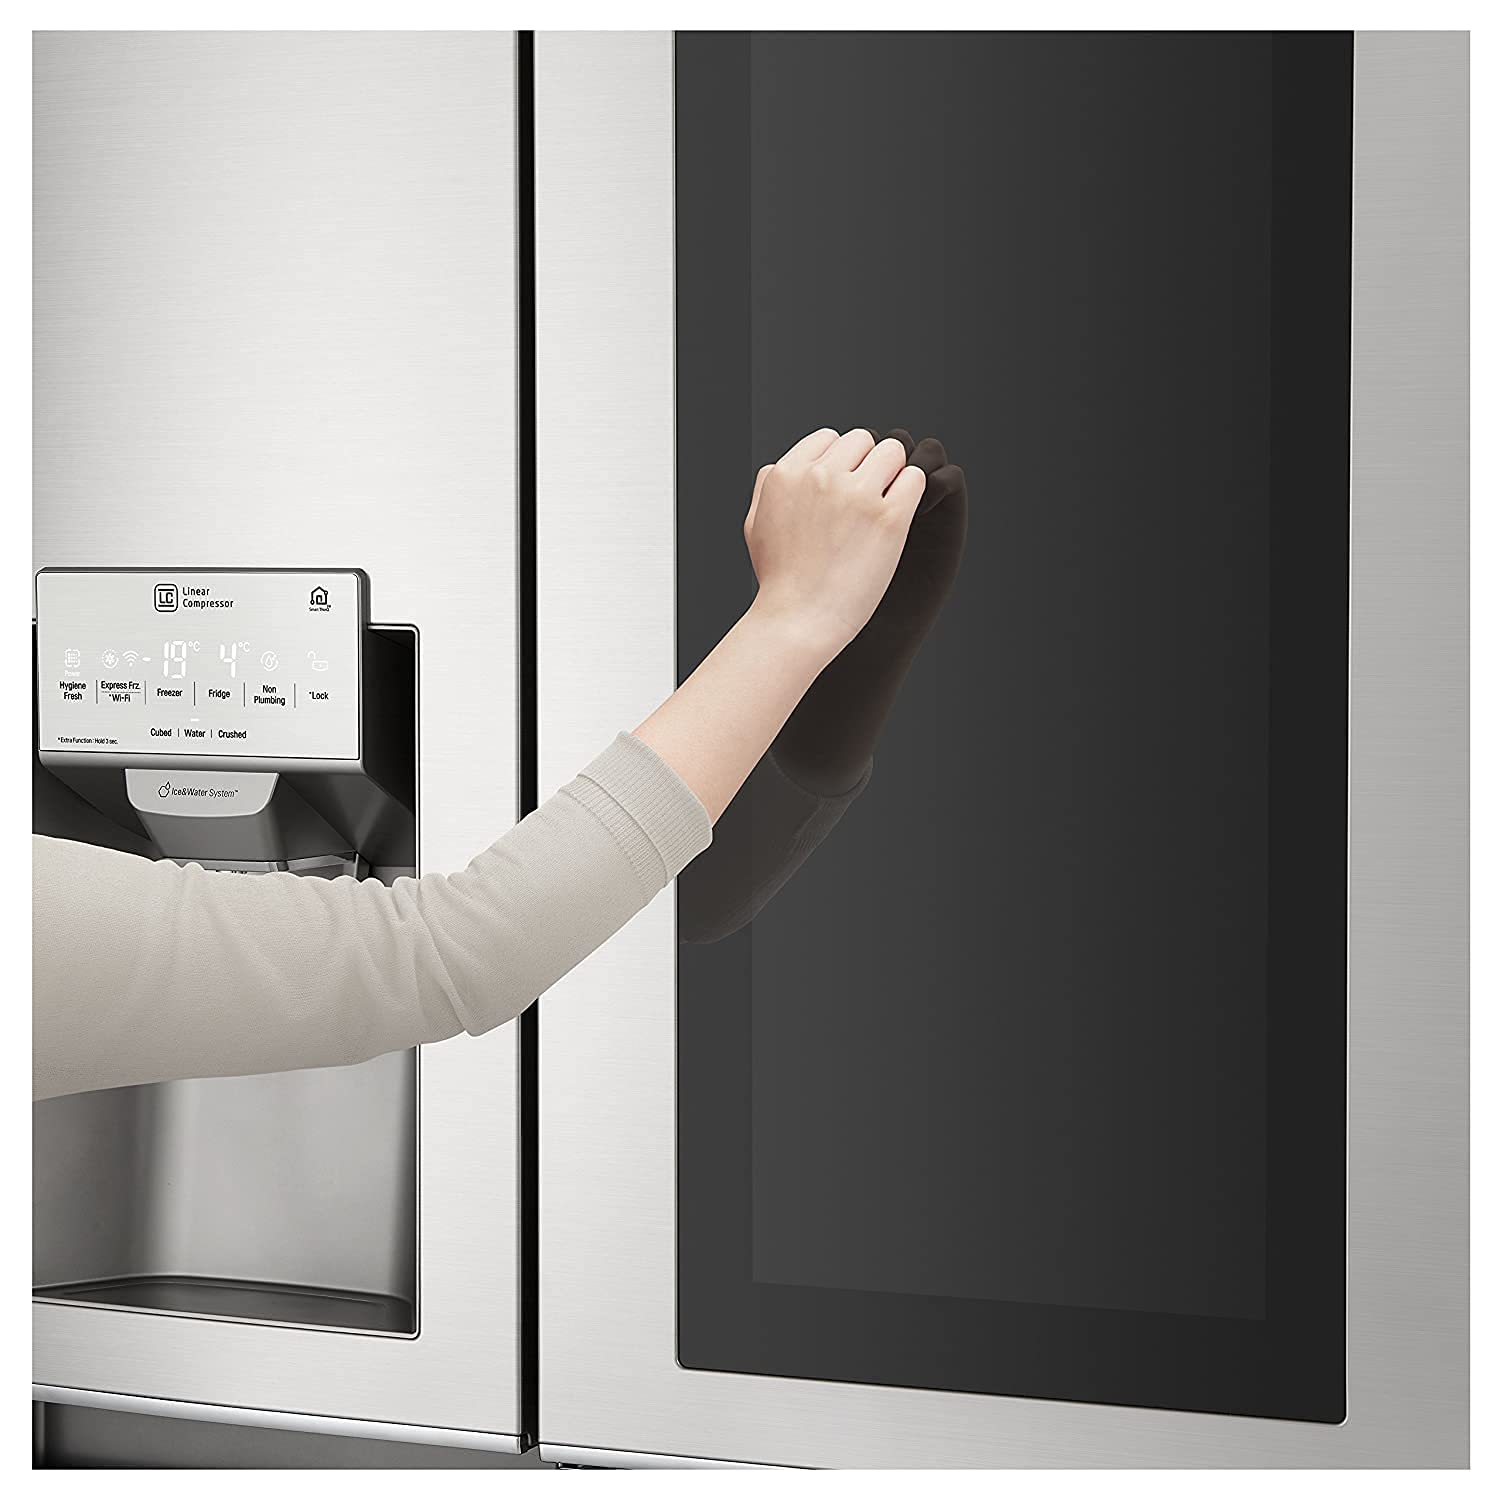 A lg refrigerators is being checked